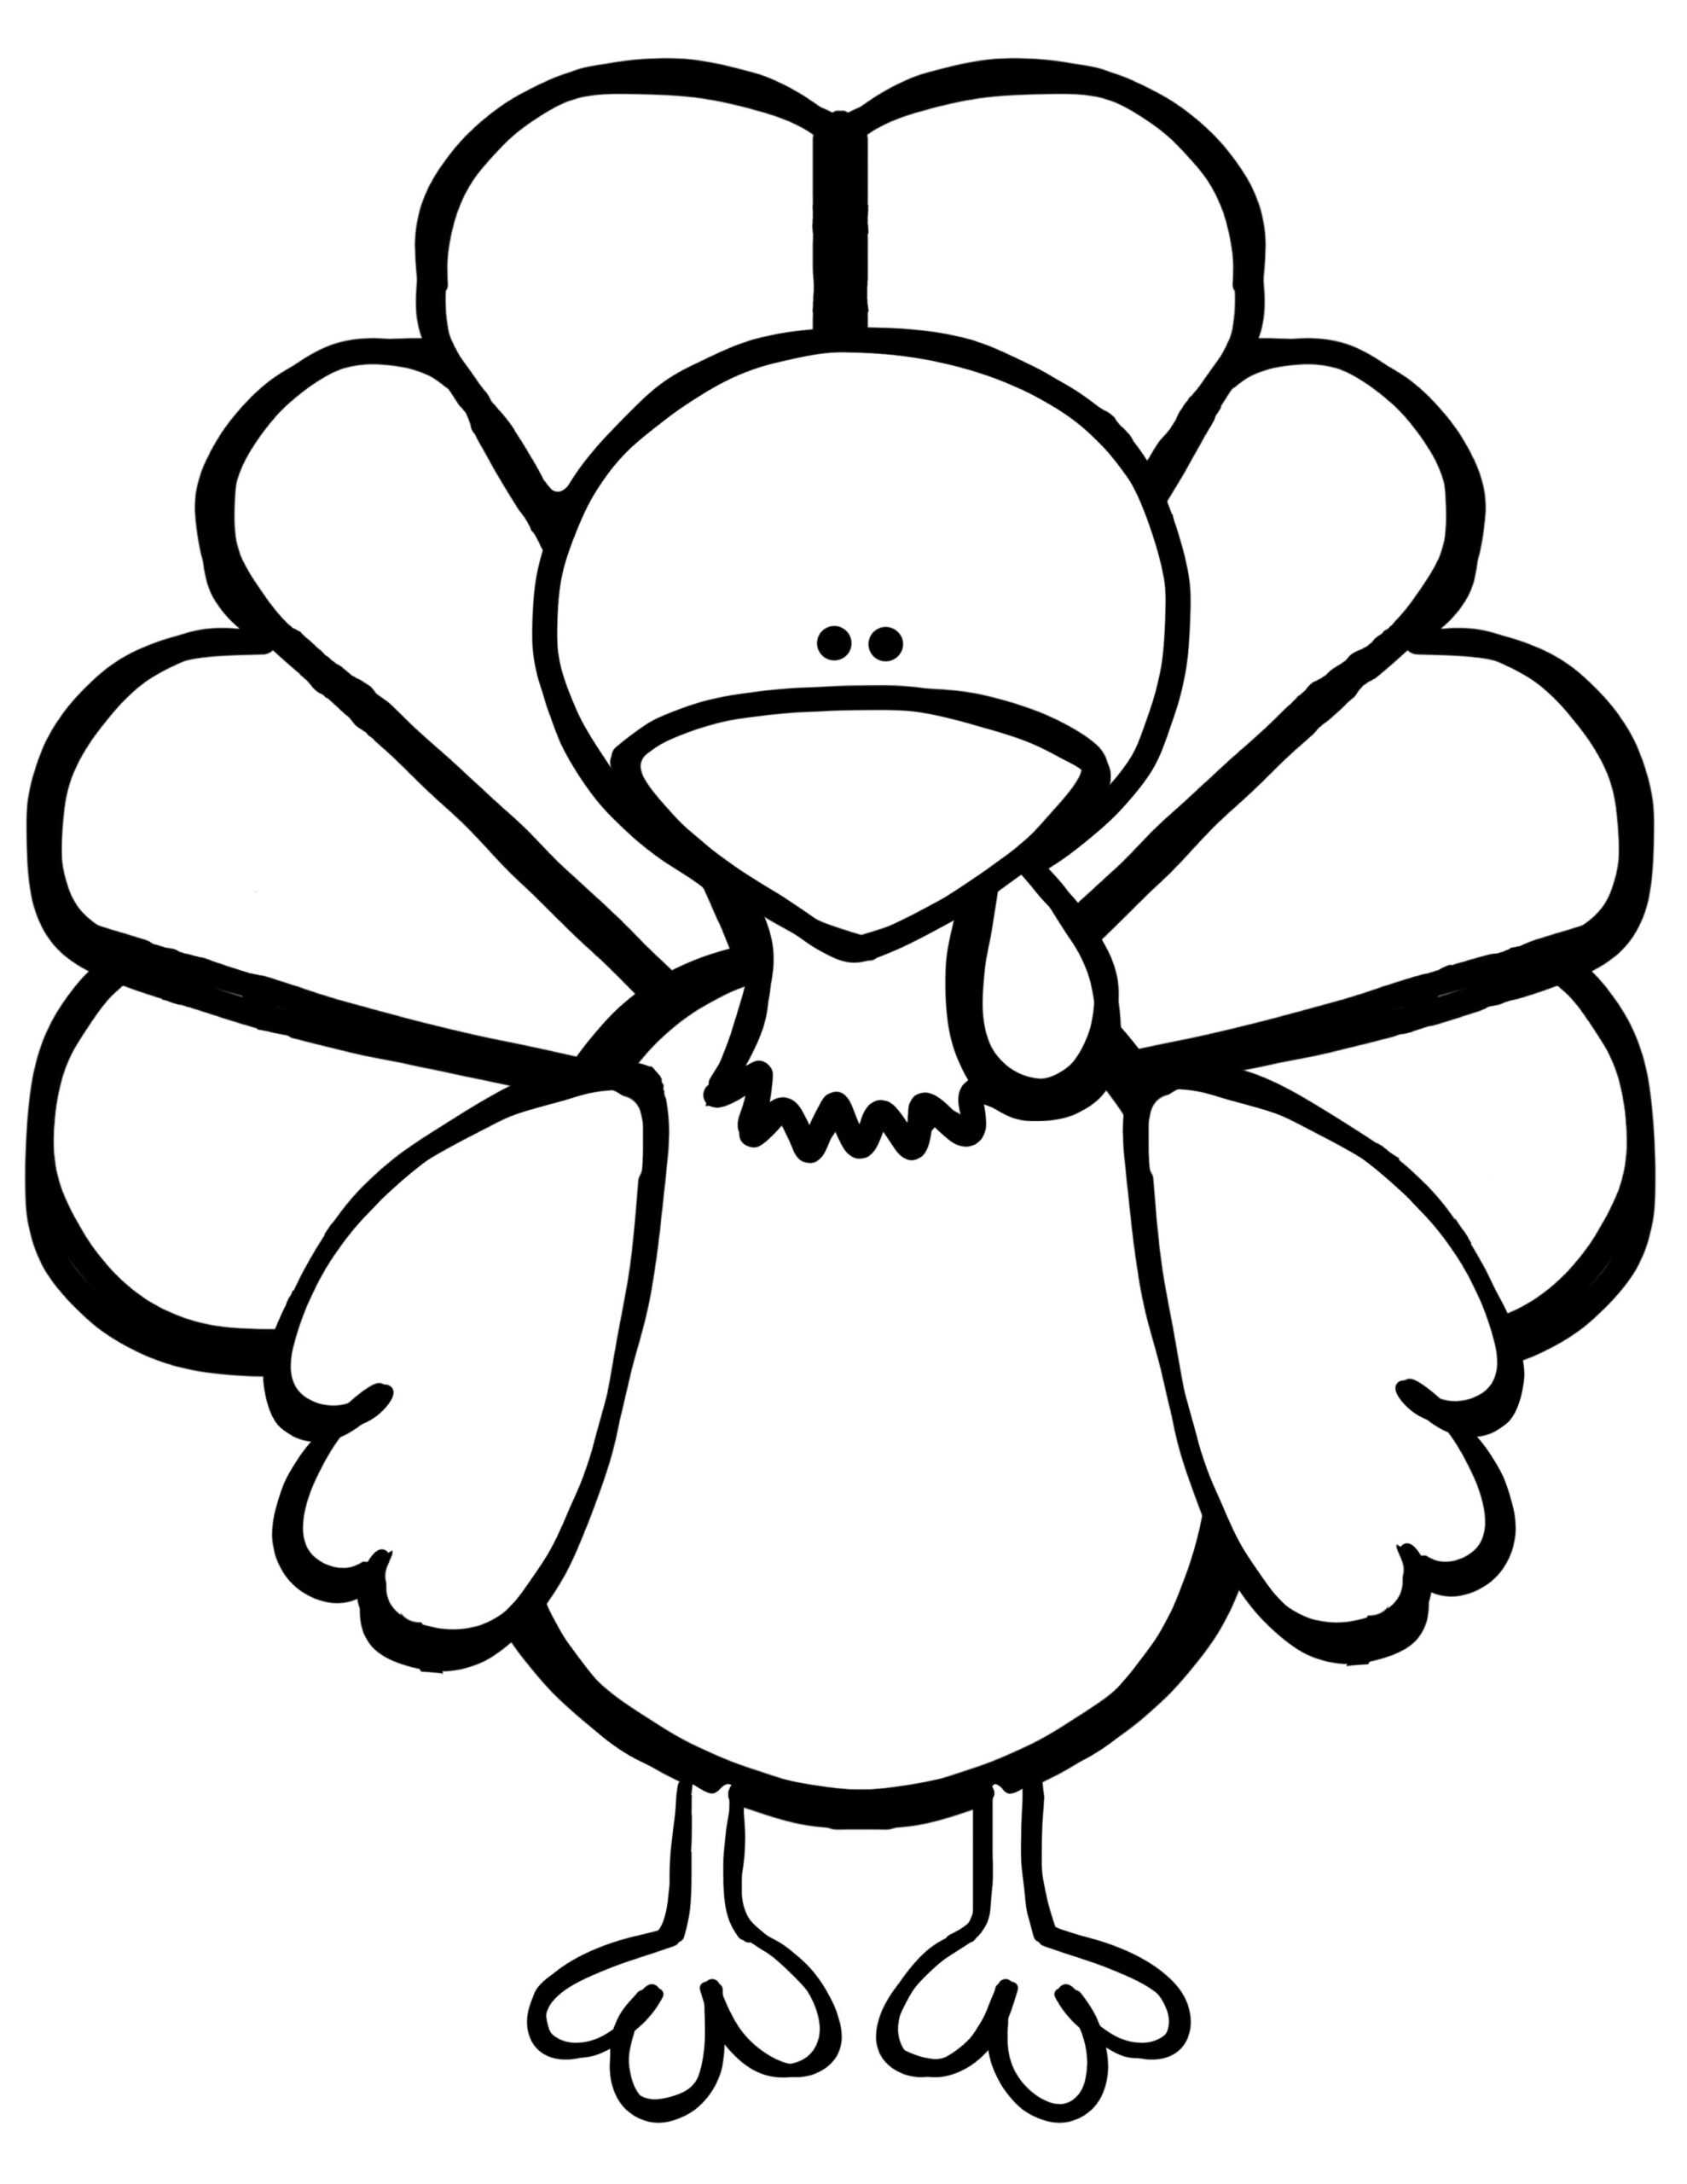 Everything You Need For The Turkey Disguise Project – Kids With Blank Turkey Template